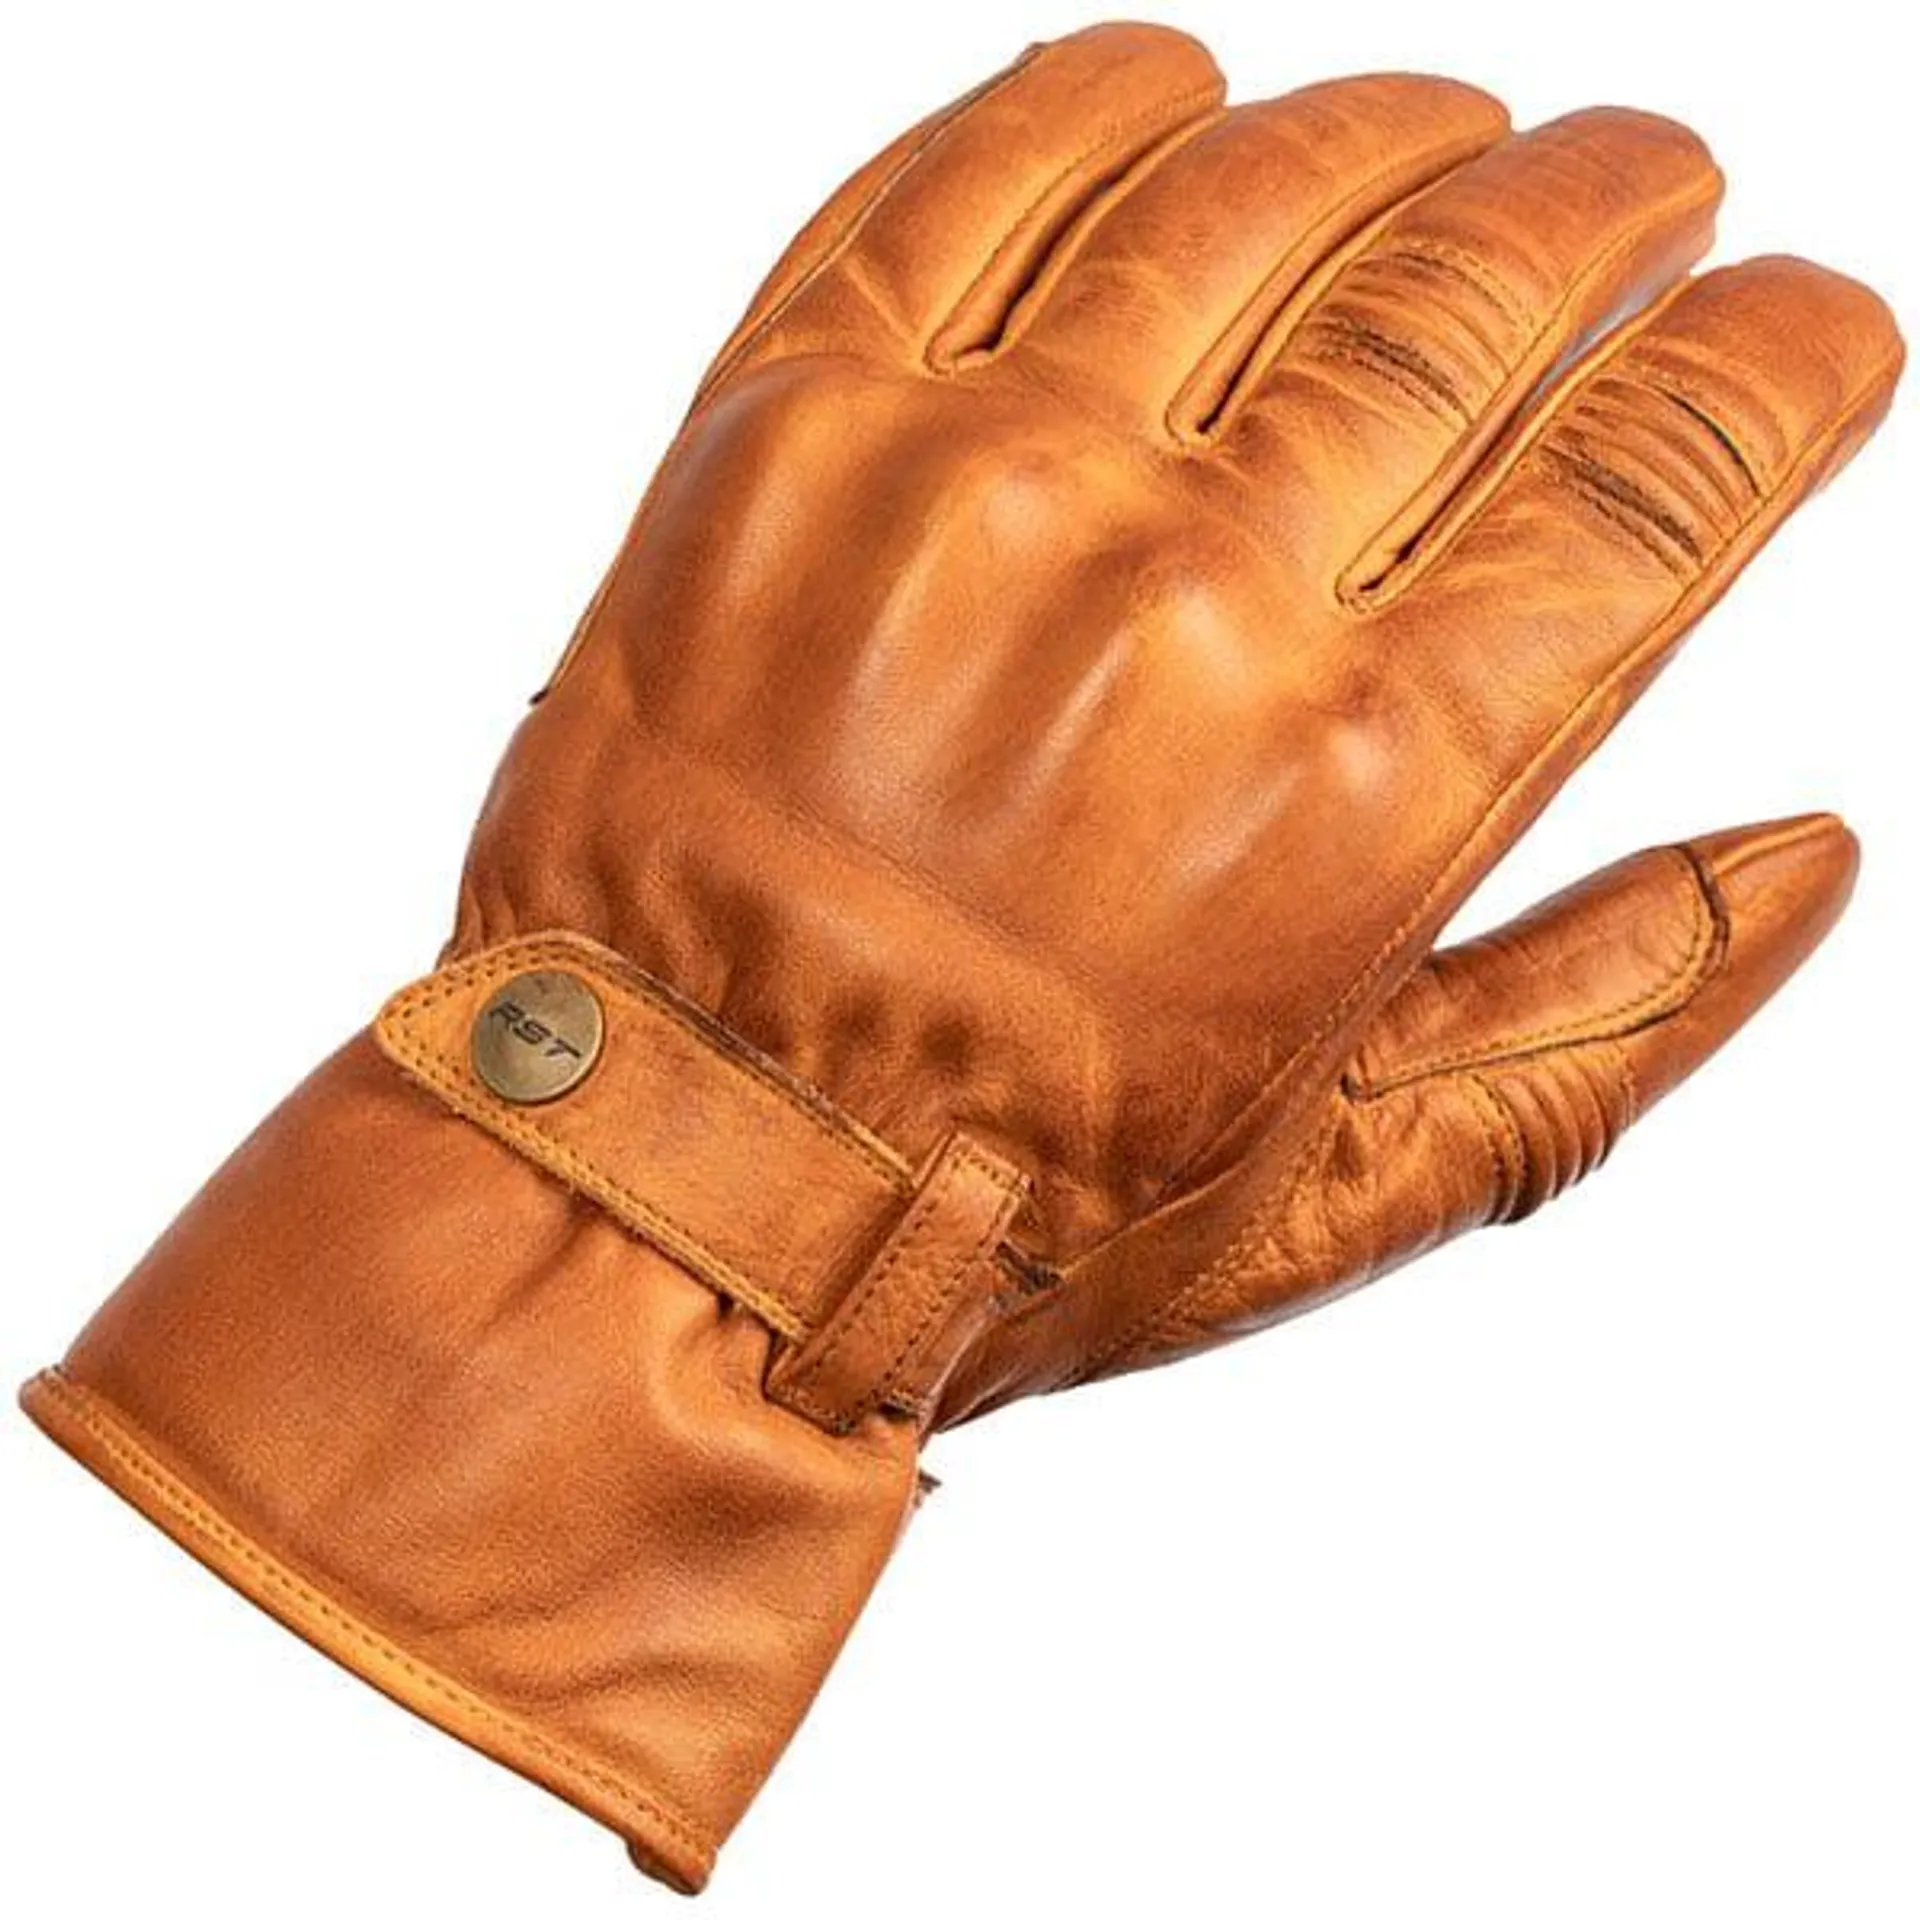 RST Roadster 2 CE Leather Gloves - Tan